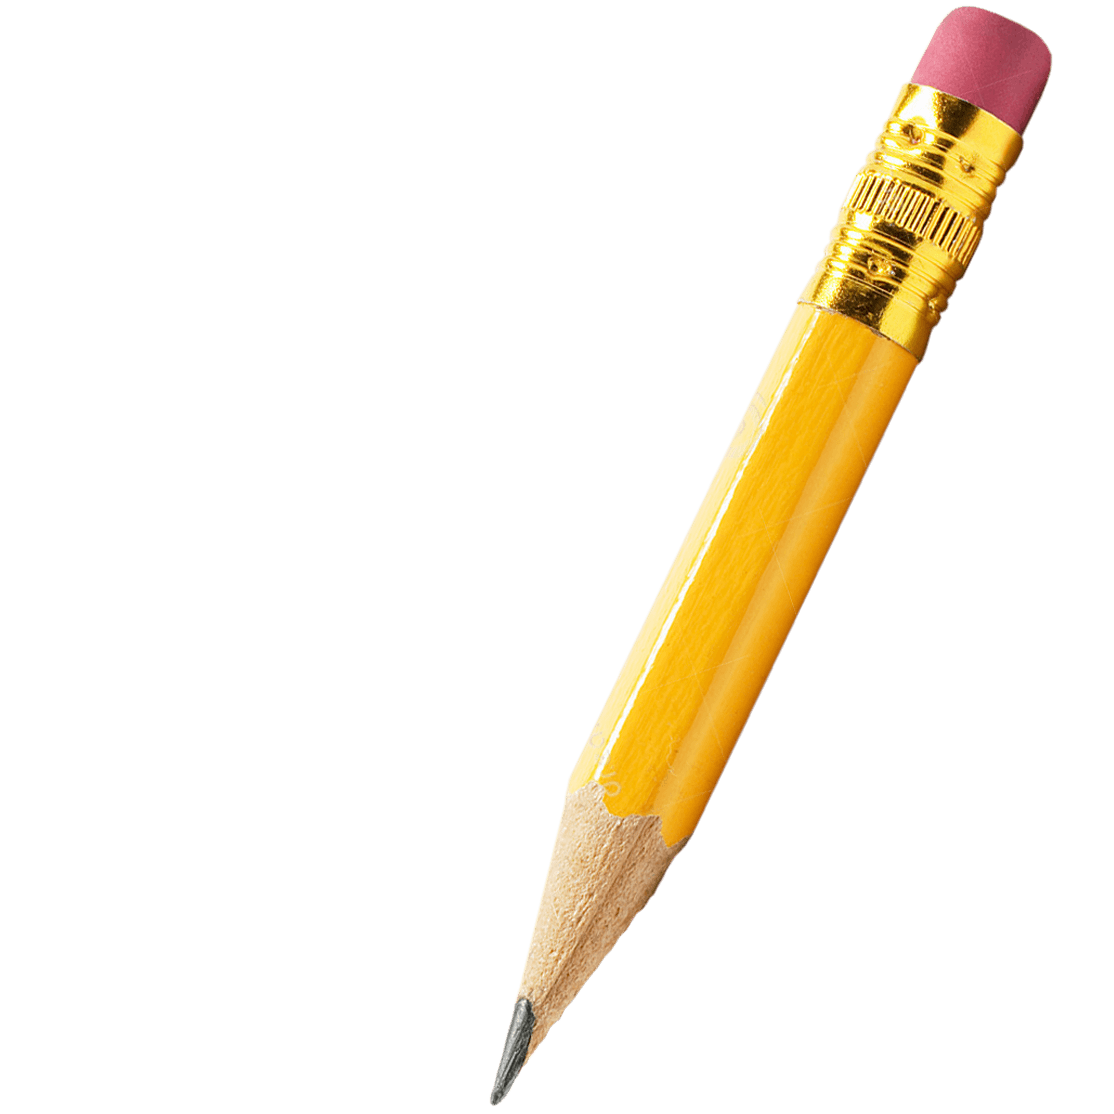 Pencil Very Small transparent PNG.